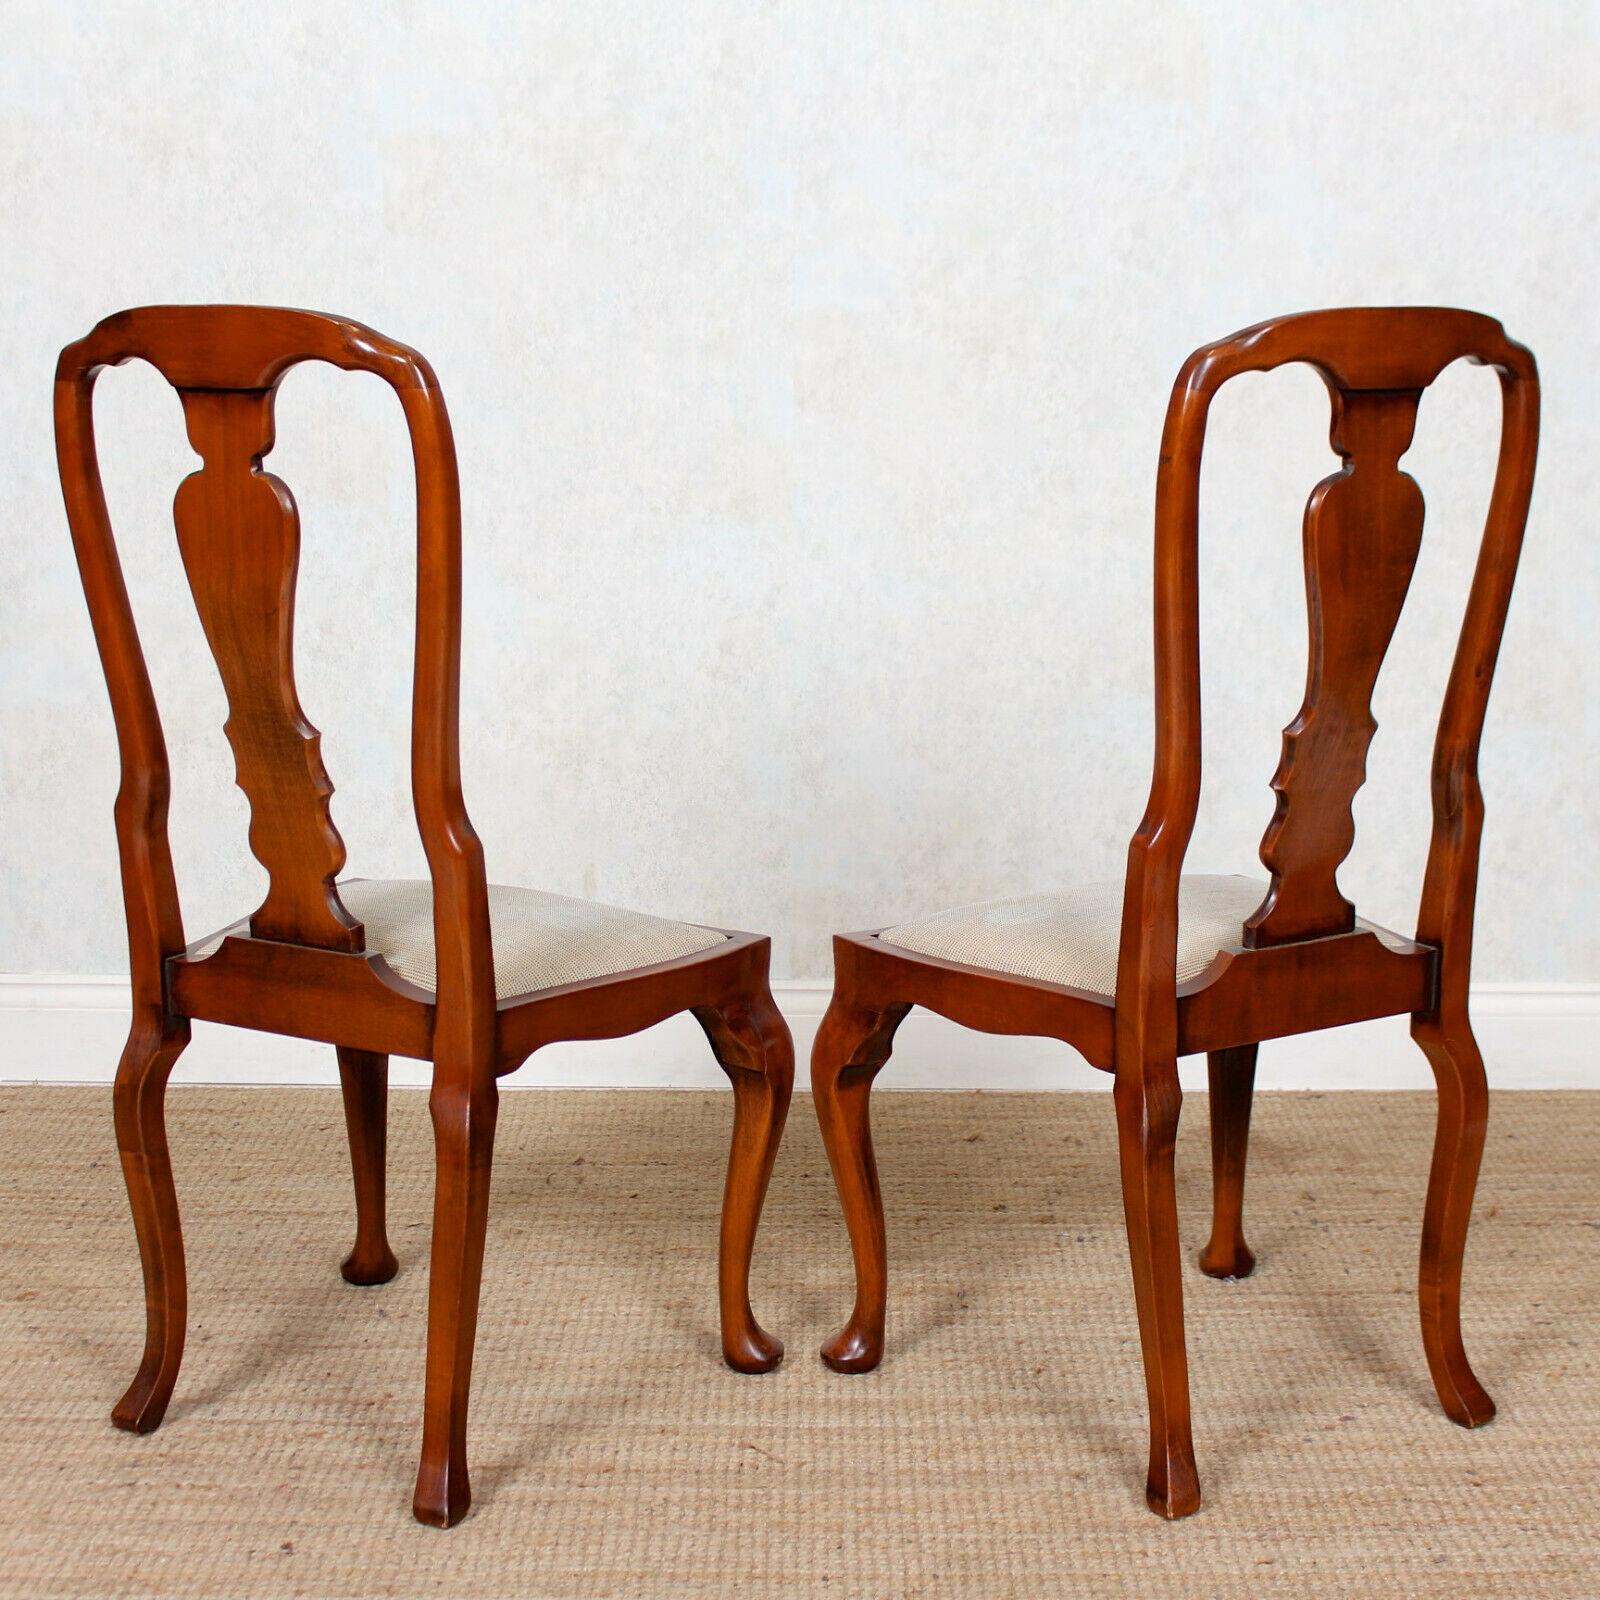 6 English Queen Anne Dining Chairs Antique Vintage 1